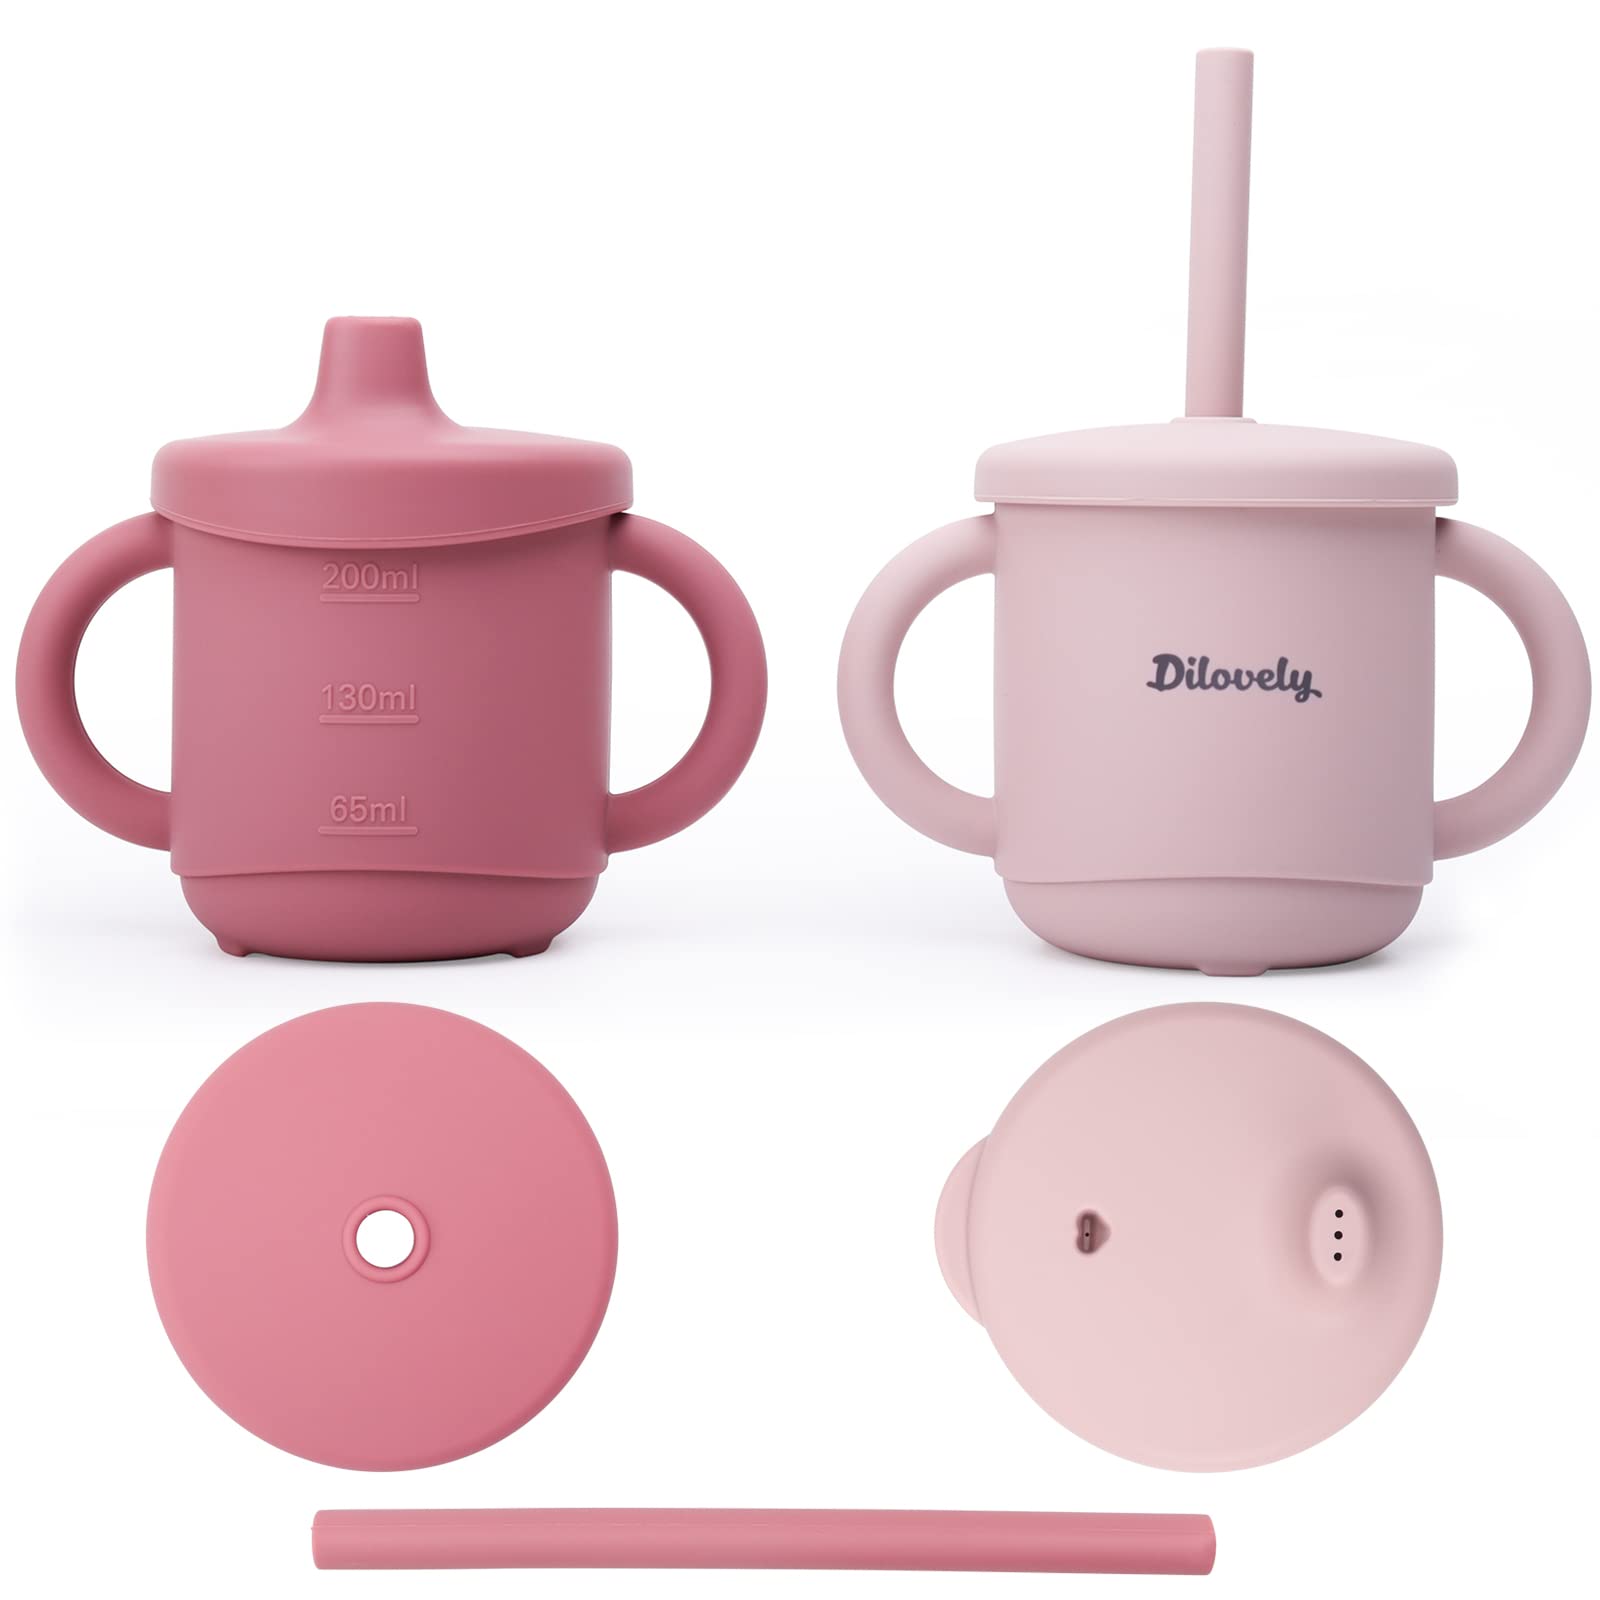 Dilovely Silicone Snack Cups for Toddlers, Kids Snack Containers